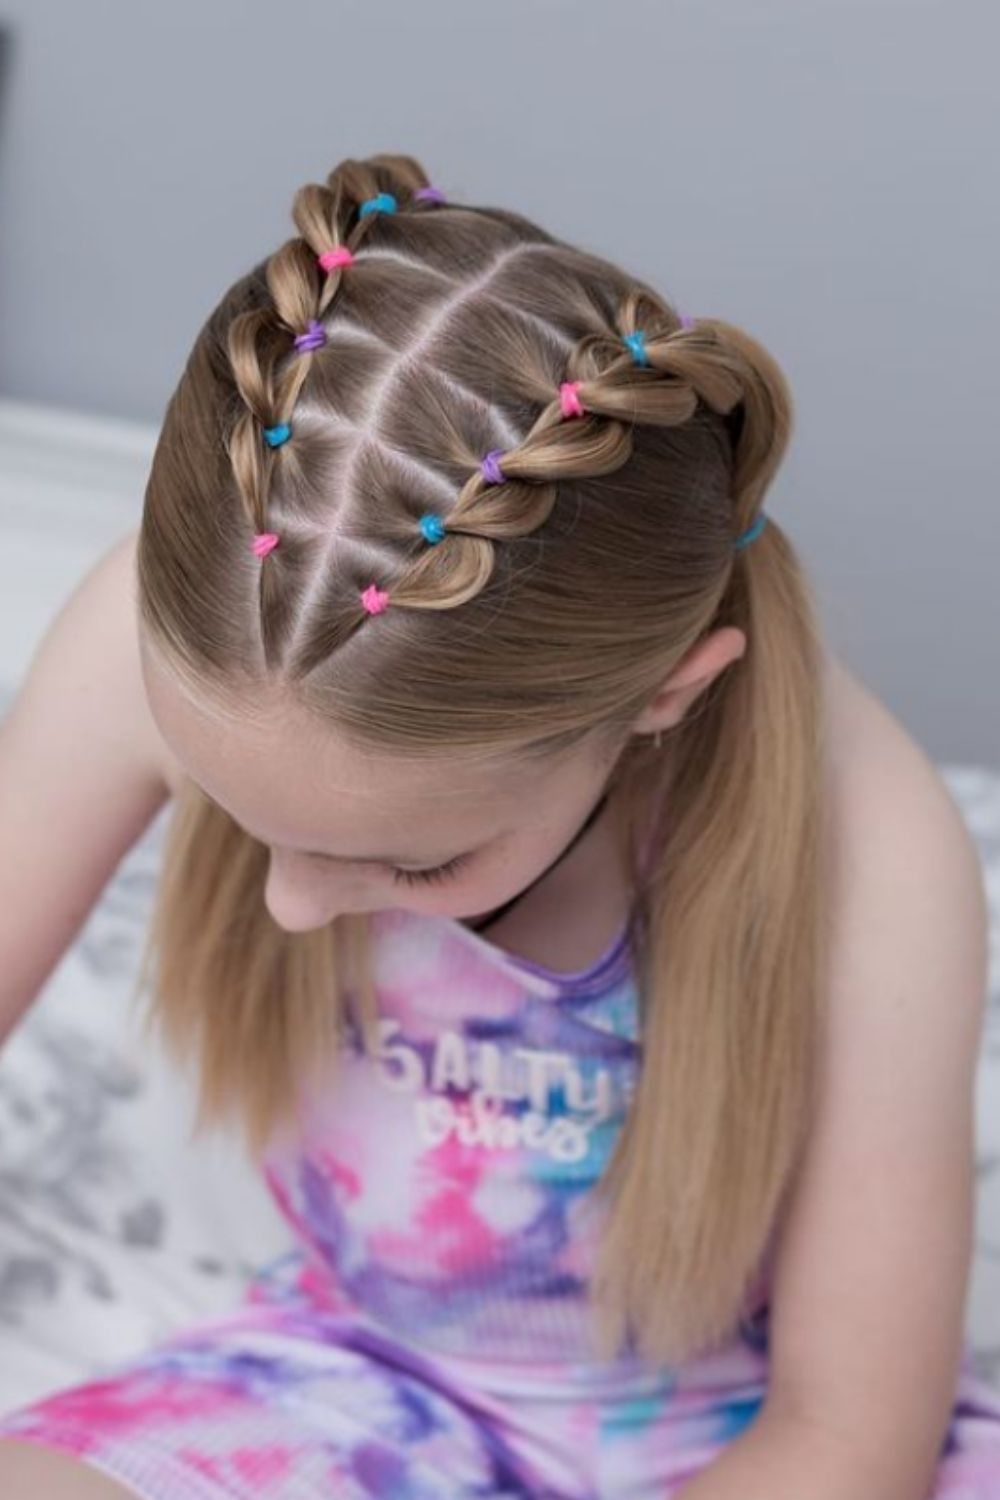 Cutest Braid Hairstyles ideas for Little Girls At the Christmas party